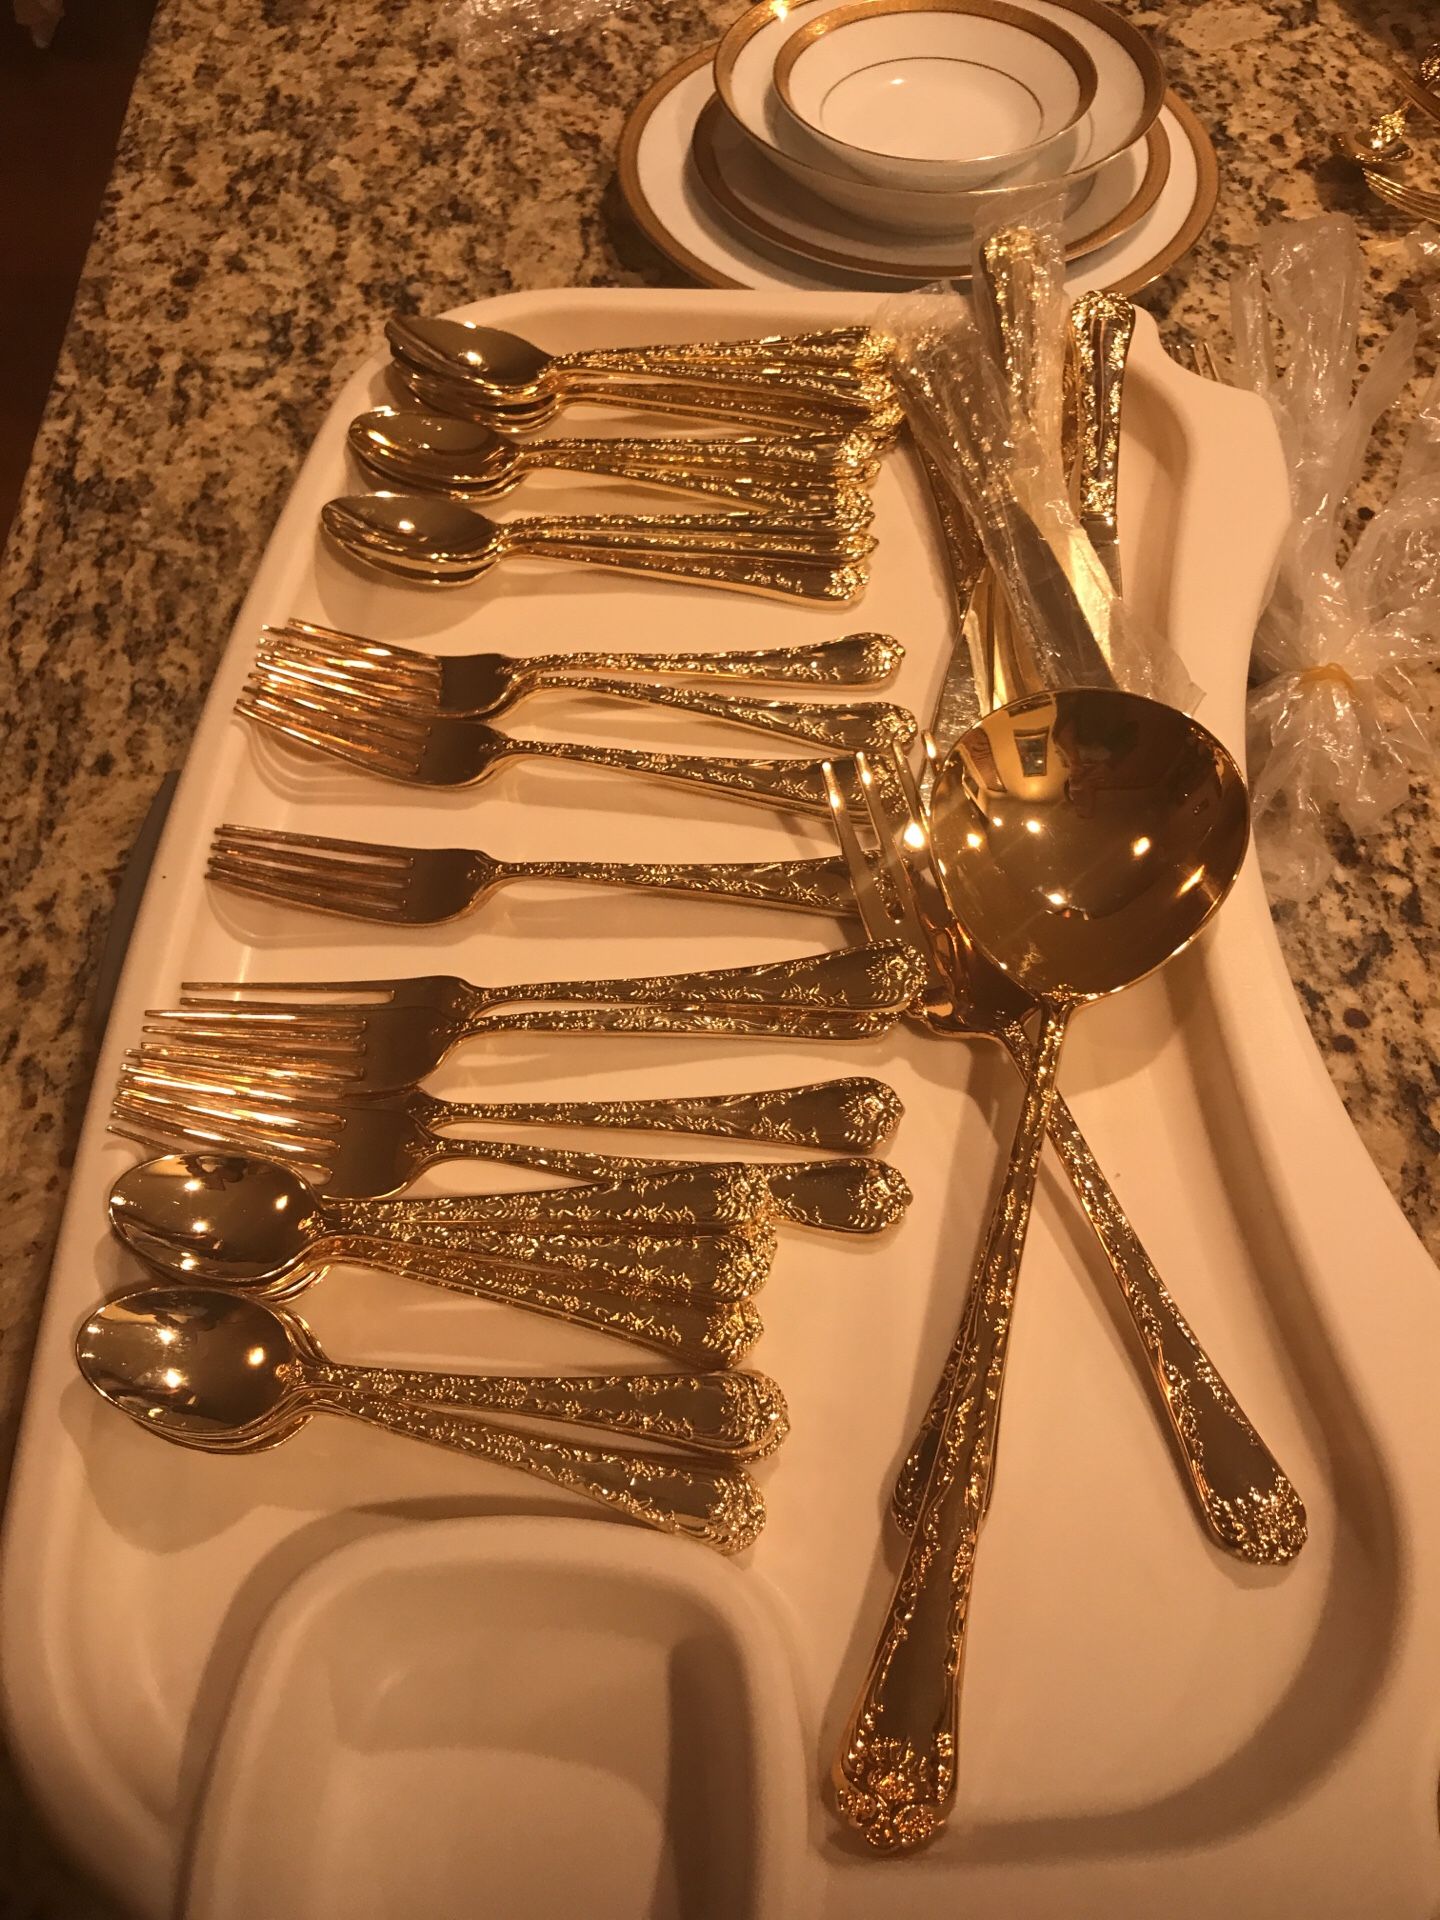 Spoon fork plate set ( gold ) (8 people)